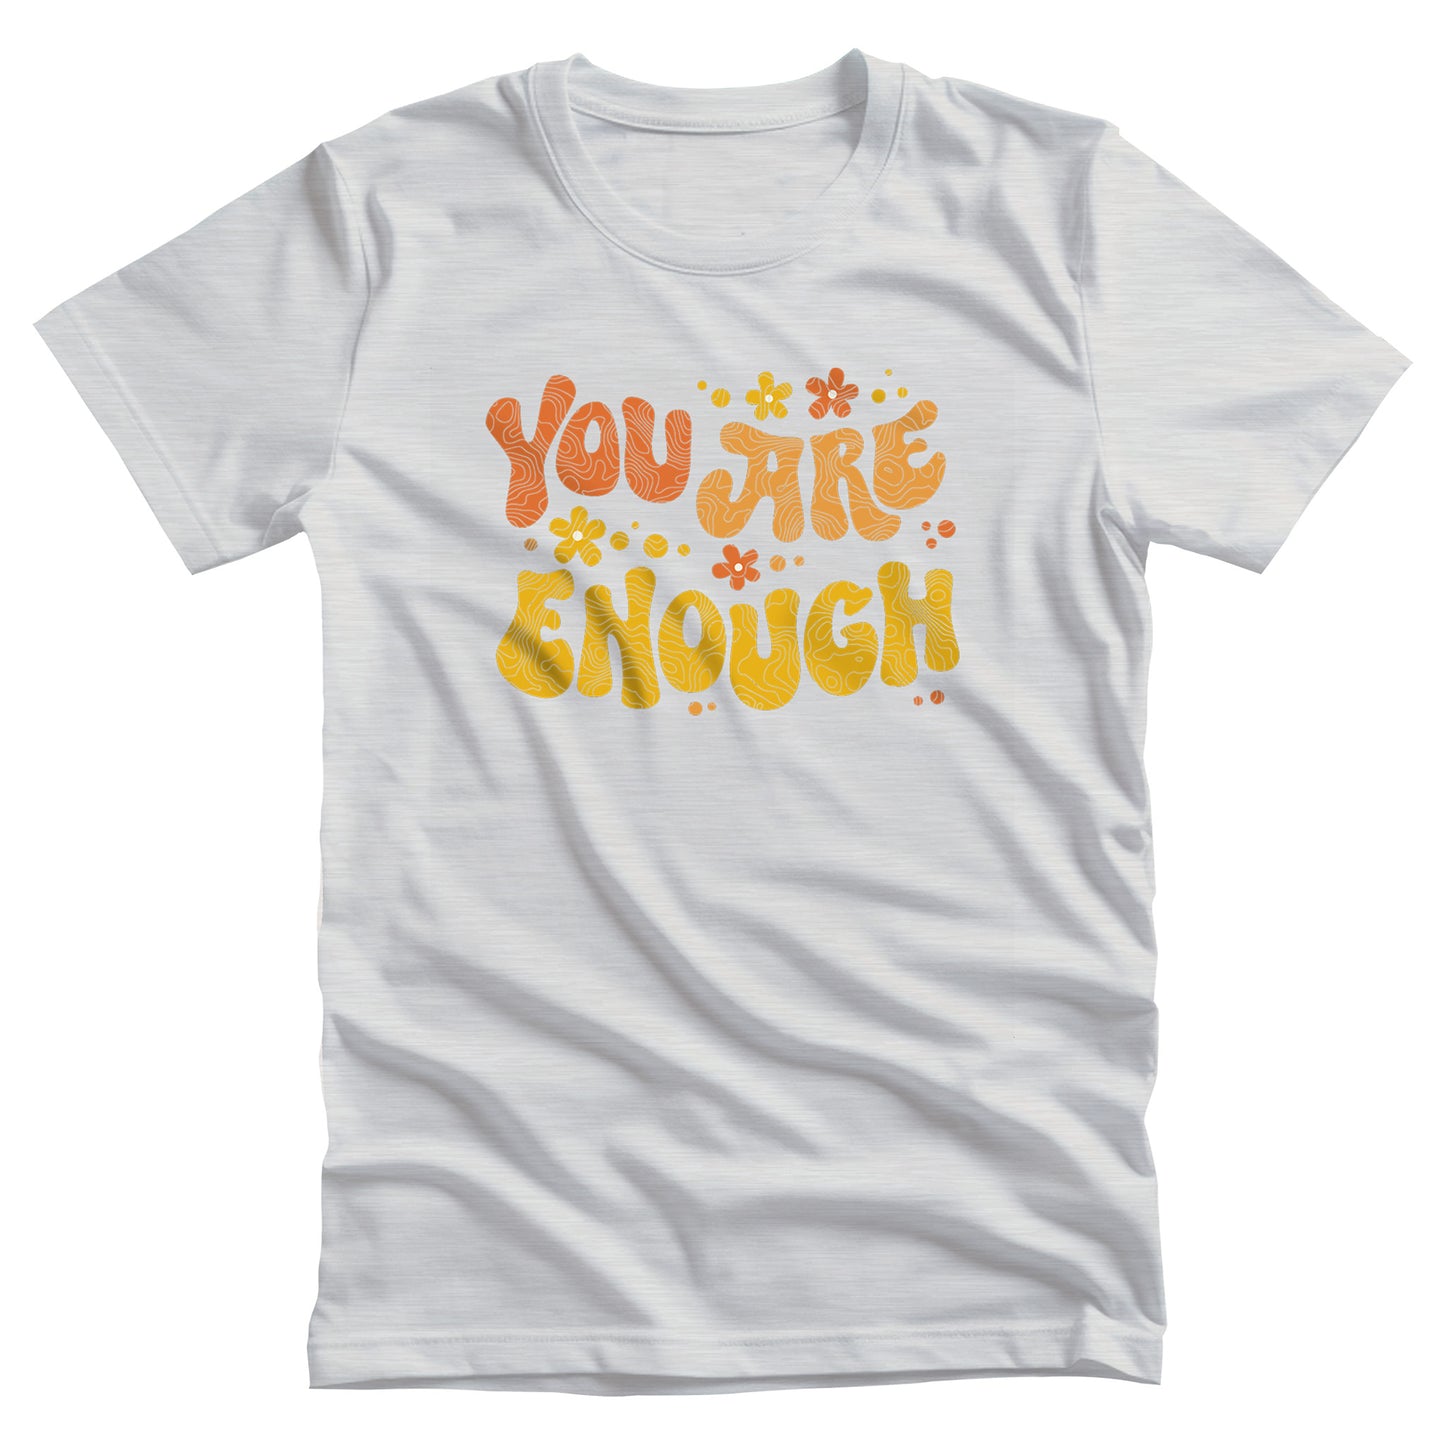 Ash color unisex t-shirt with a graphic that says “You Are Enough” in a retro font. There are small retro flowers spaced throughout. “You” is reddish-orange, “Are” is orange, and “Enough” is yellow, all retro as well.